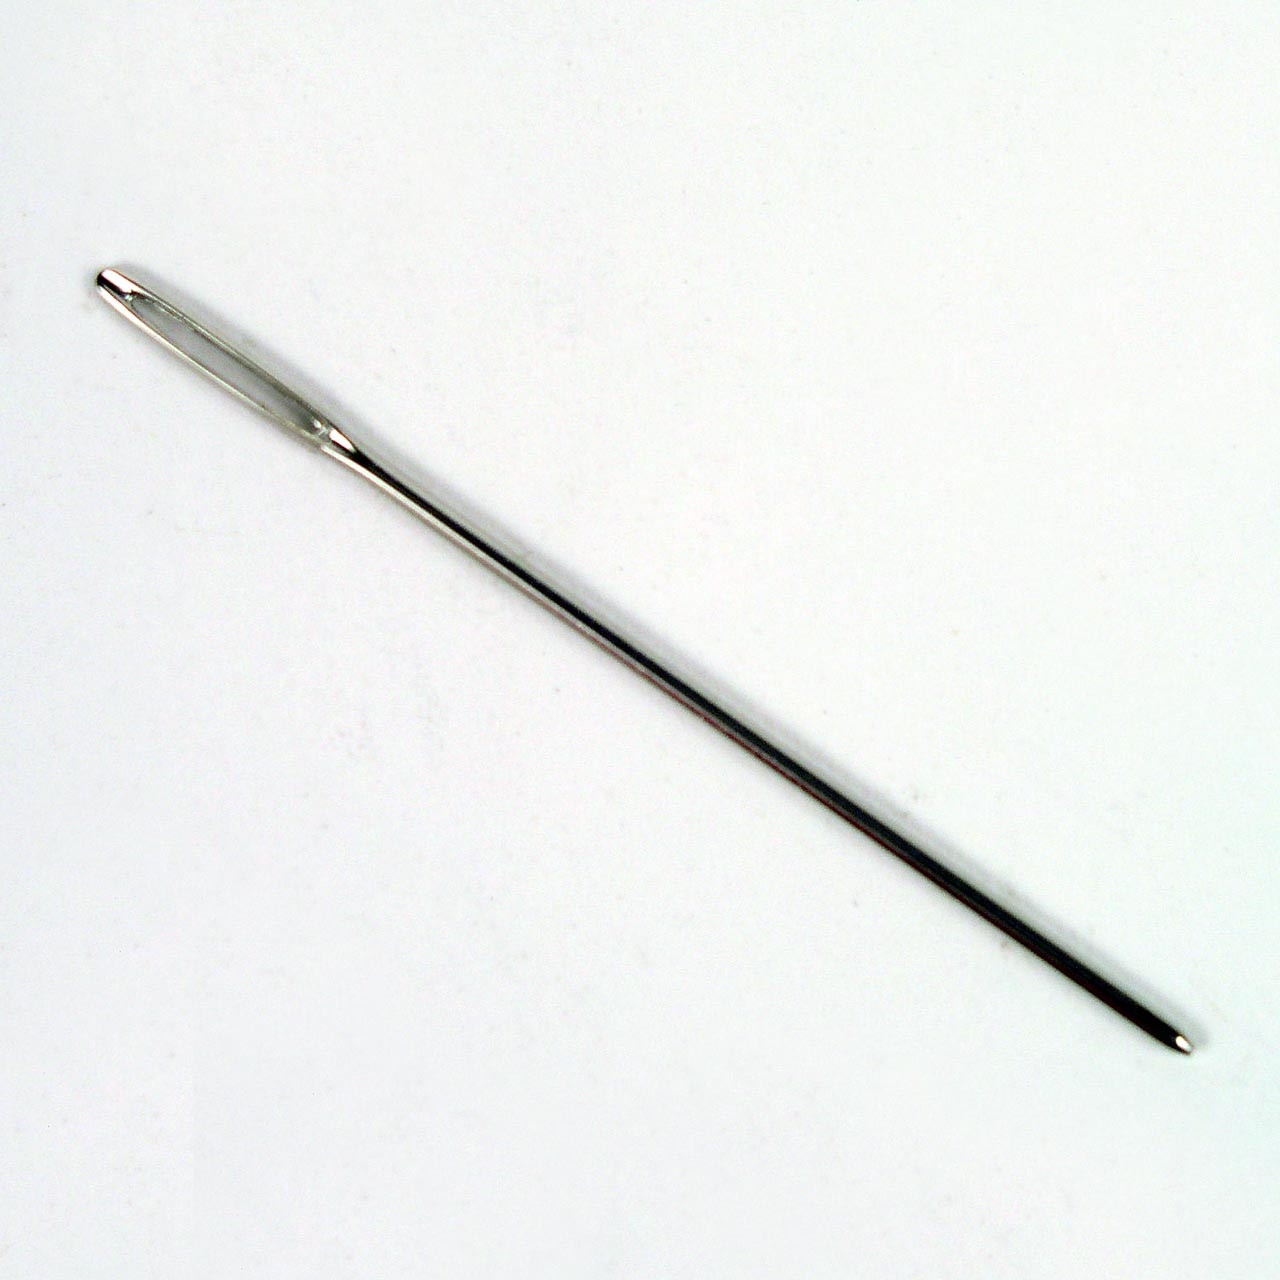 Blunt Stitching Needles w/XL eye 100 pack Tandy Leather 1195-10 FREE SHIPPING! 